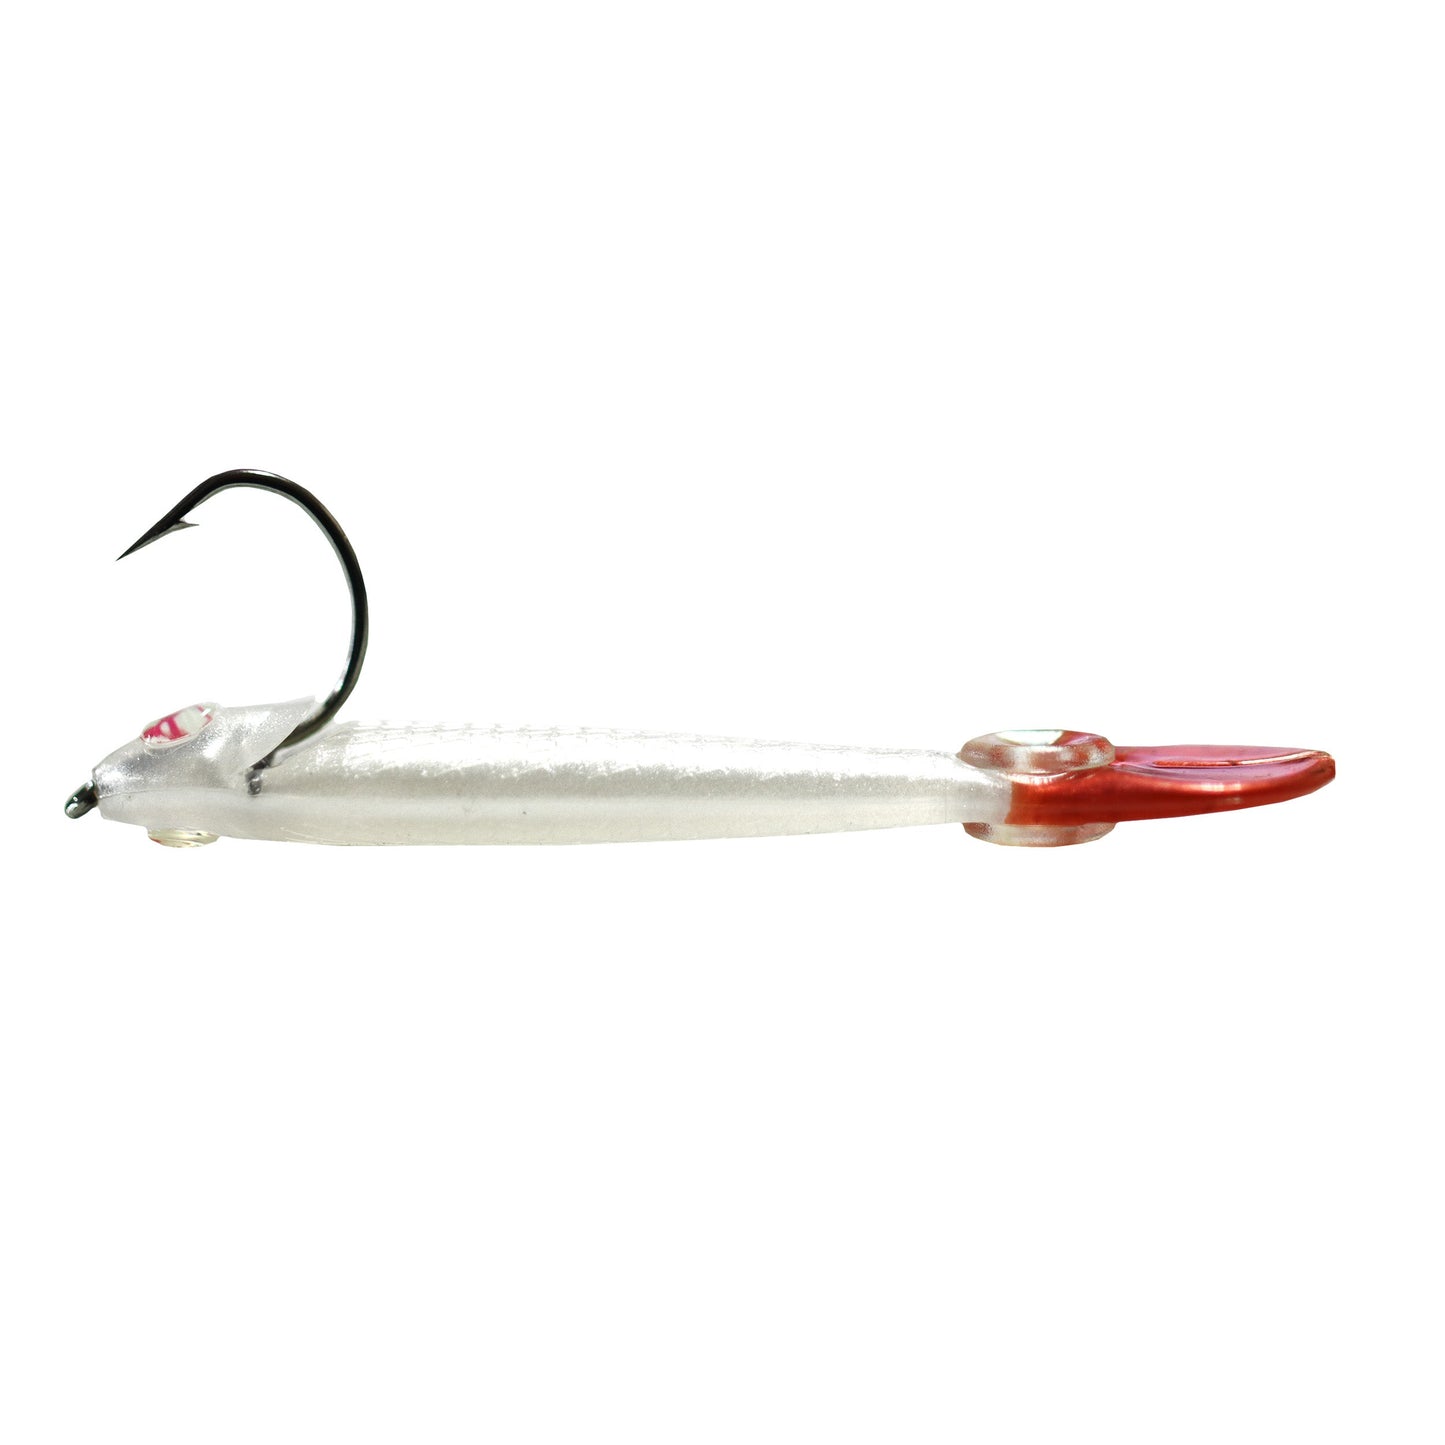 3.25" 9pc. Recoil Baits - St. Jude *Limited Edition Lure*